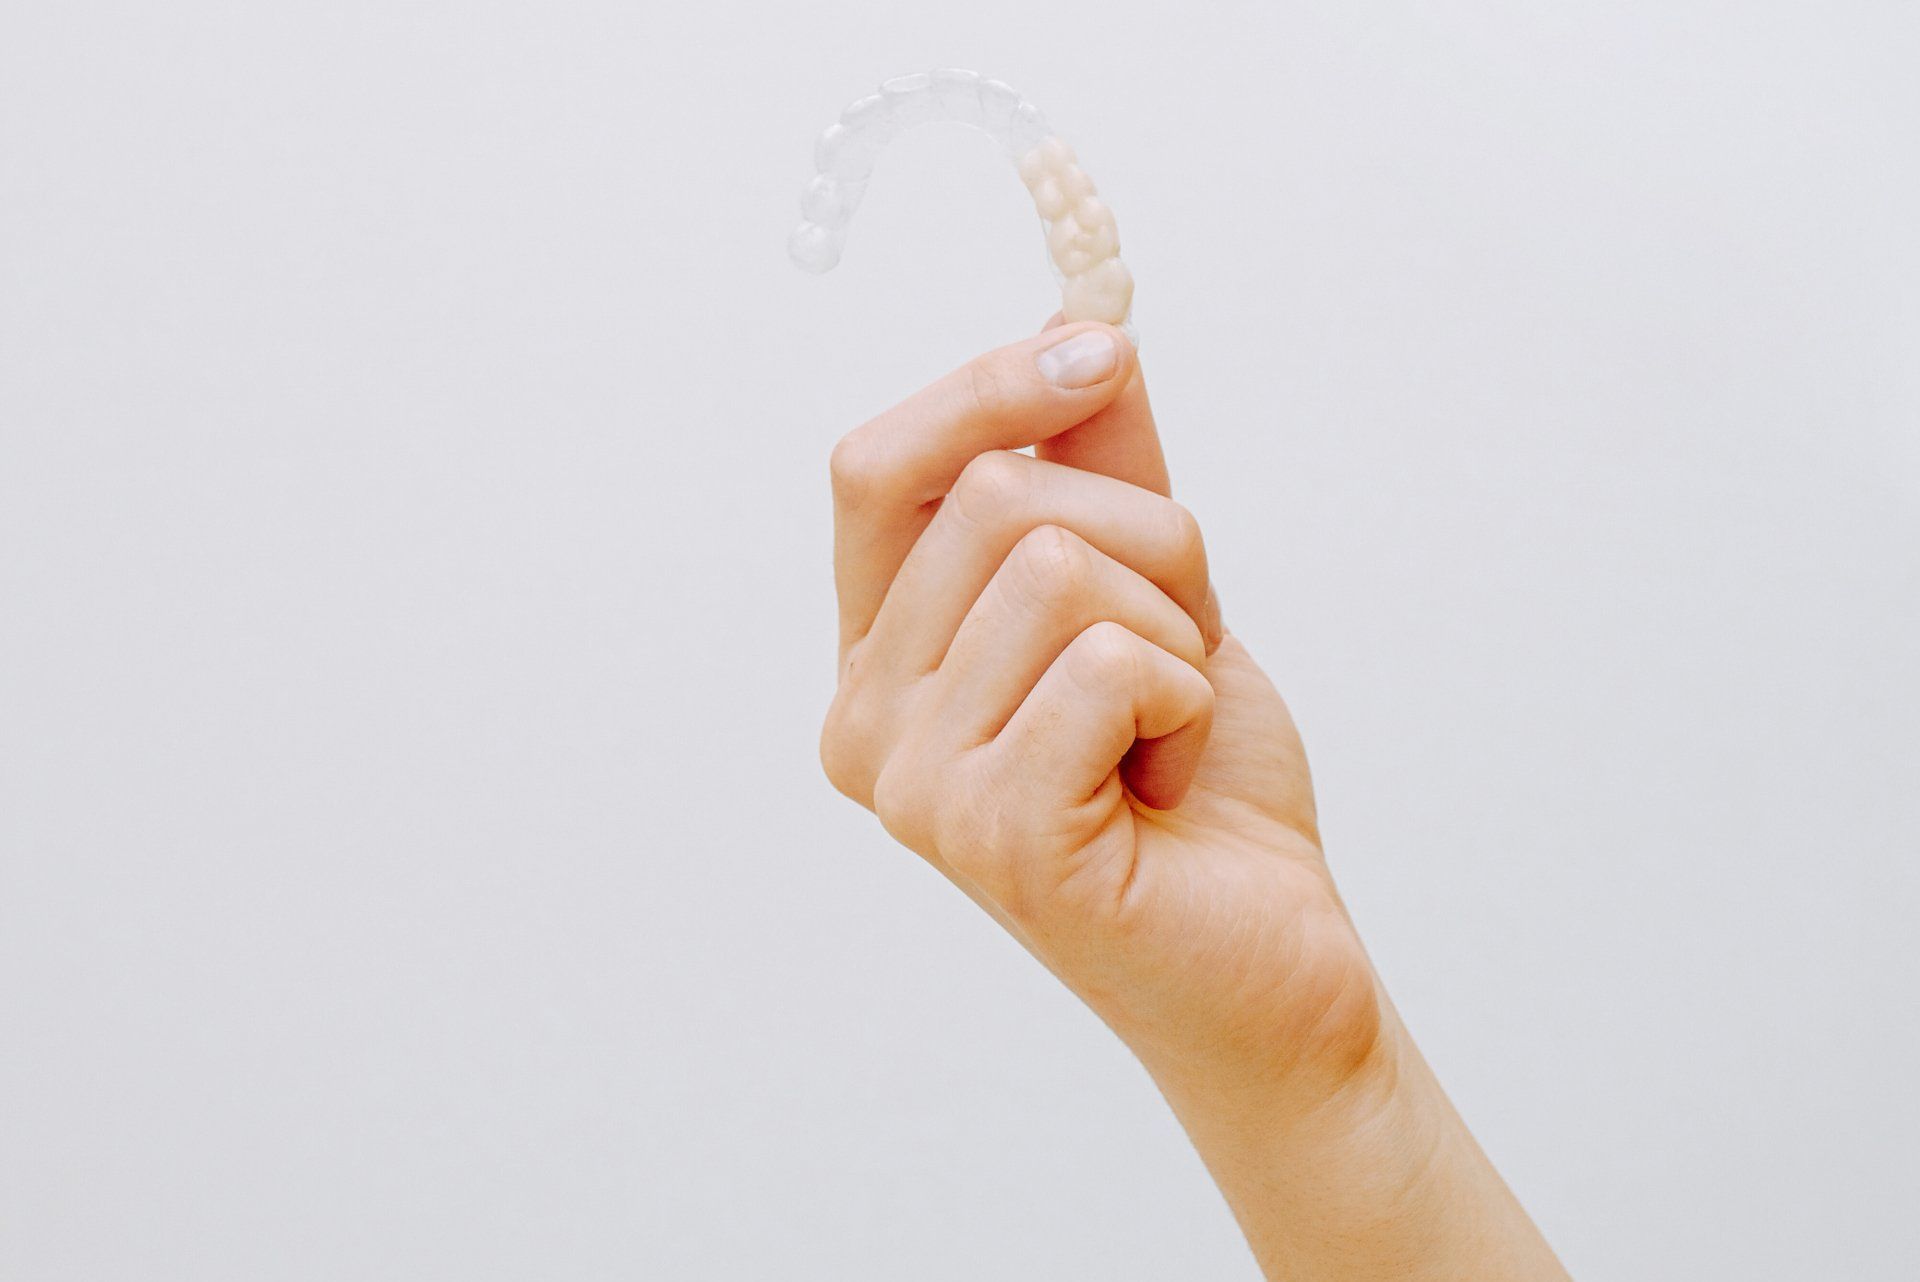 a woman 's hand is holding a clear plastic object